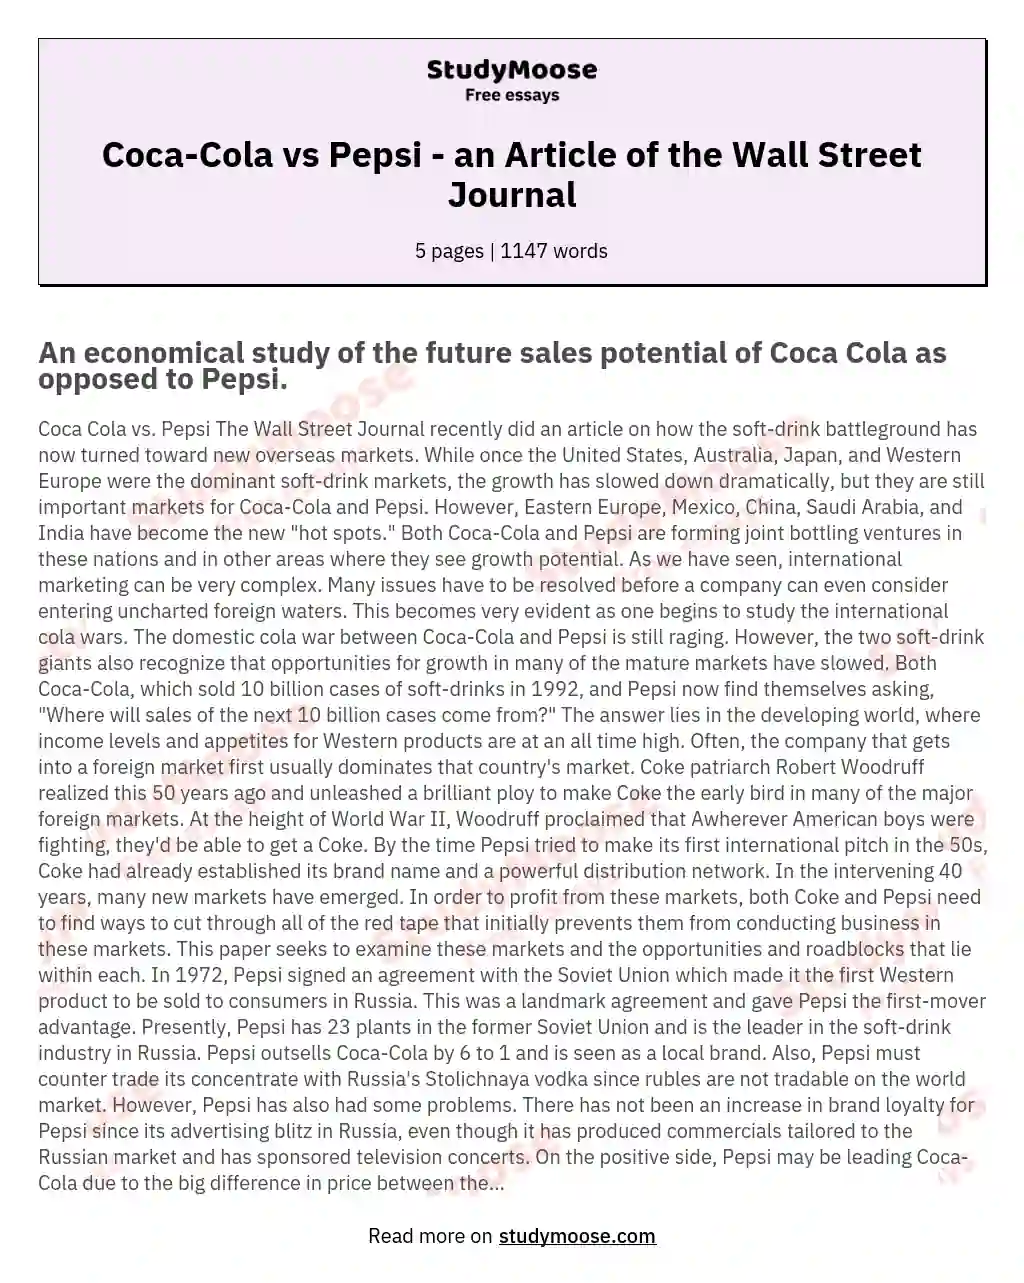 Coca-Cola vs Pepsi - an Article of the Wall Street Journal essay